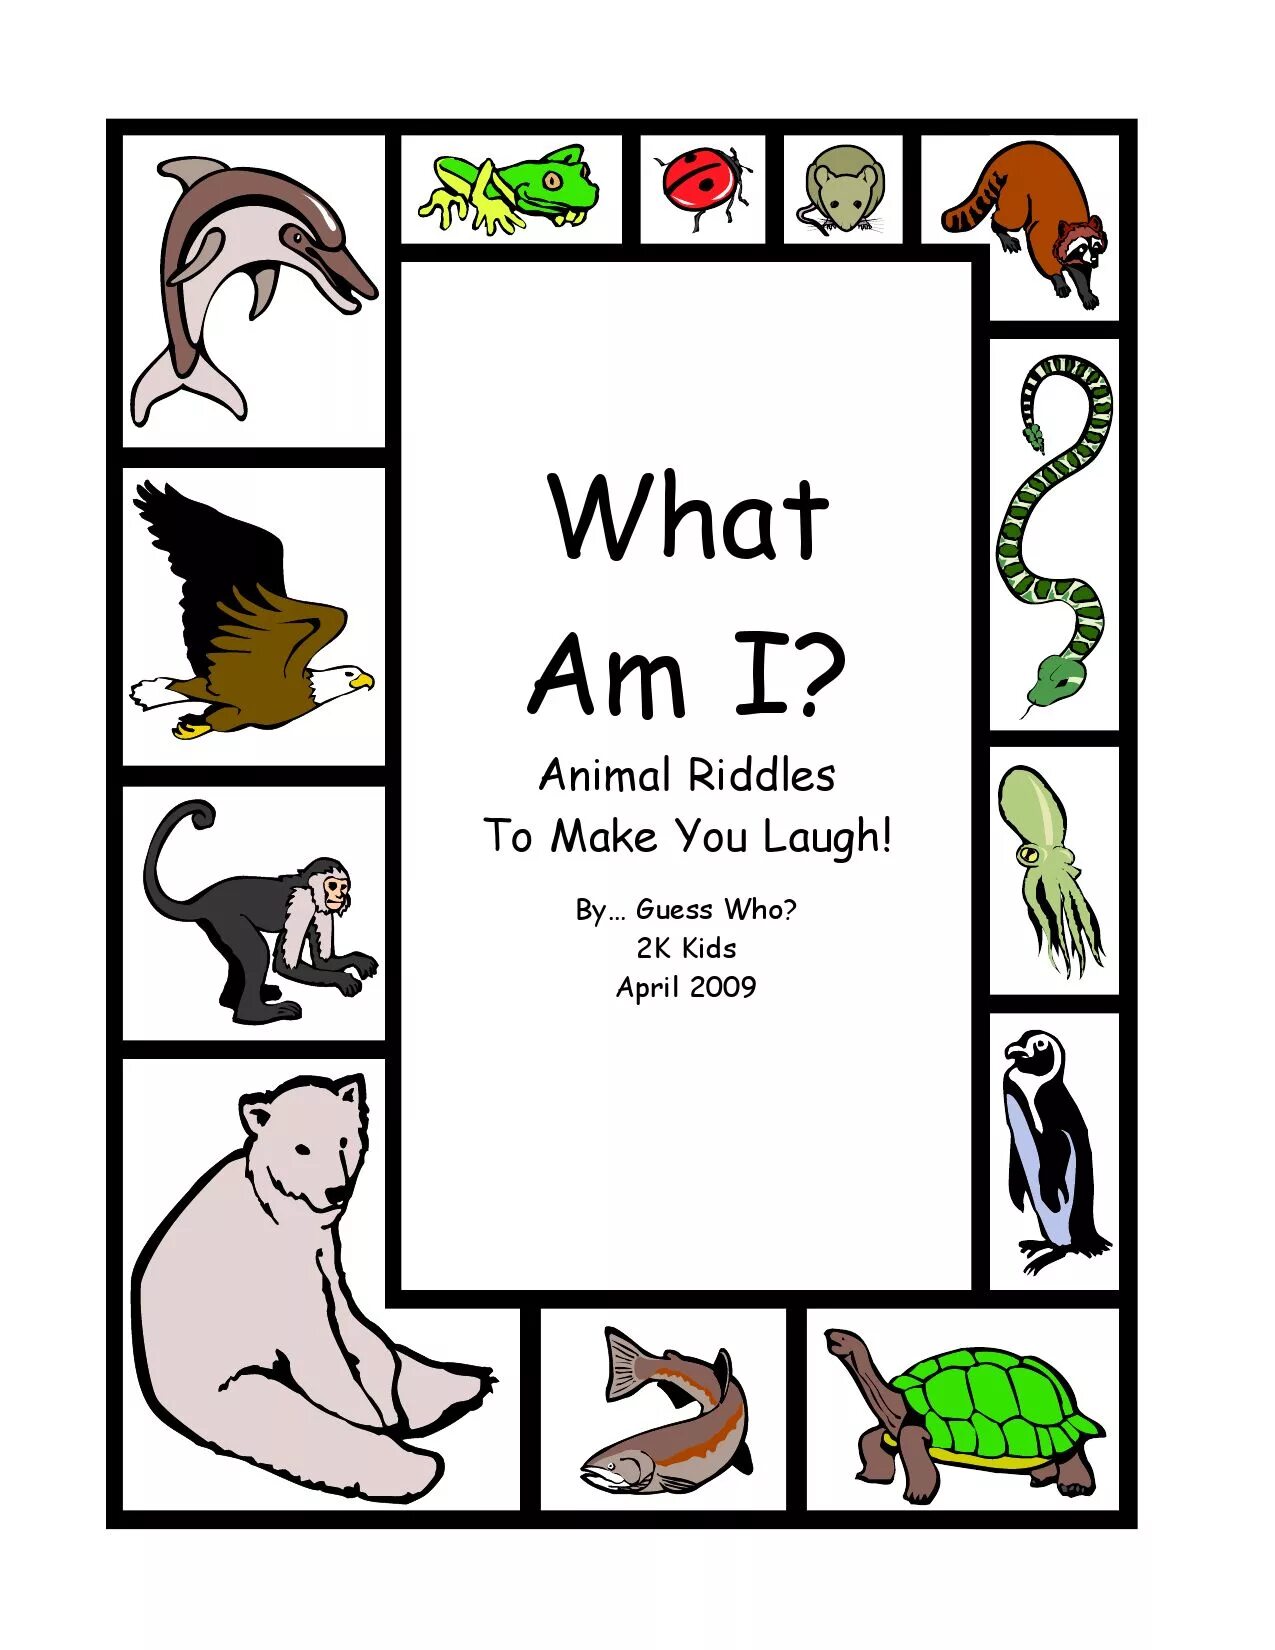 Pet s riddles игра. Animal Riddles. Riddles about animals for Kids. English Riddles for Kids. Guess the animal for Kids.